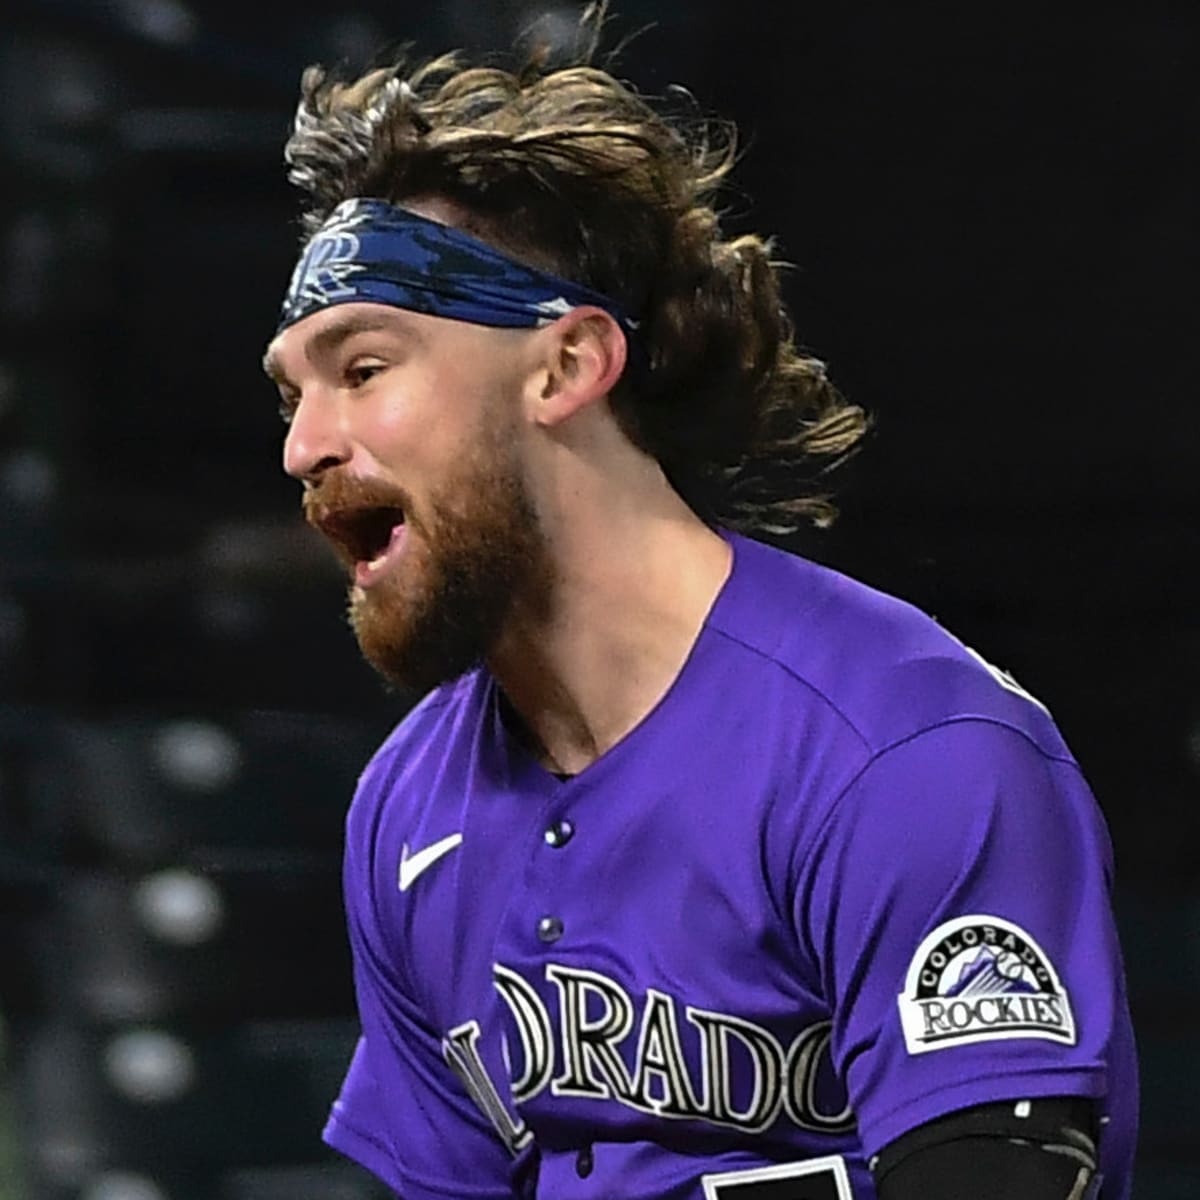 Trevor Story and Brendan Rodgers homer in Rockies' road victory over Braves  – The Denver Post